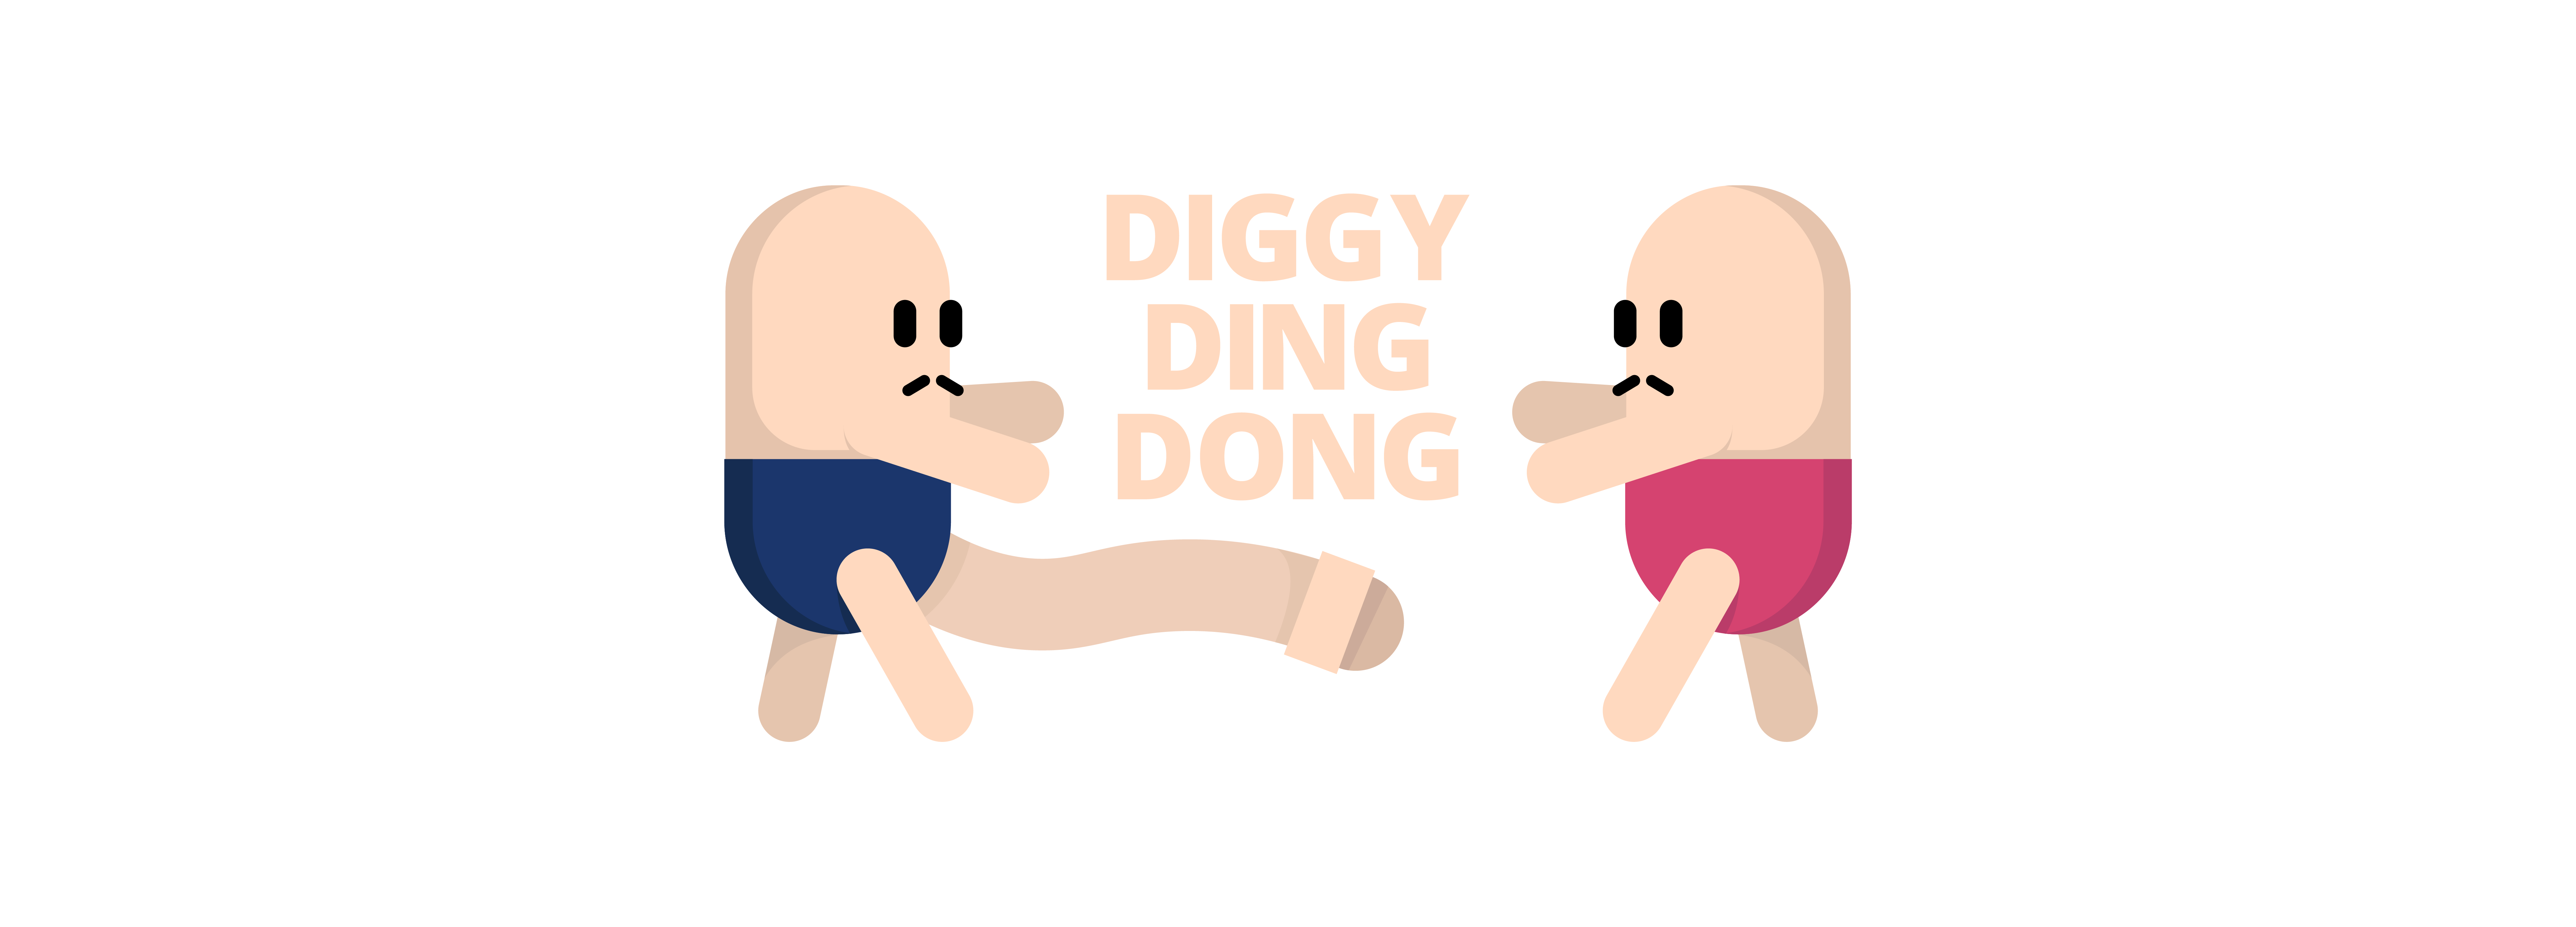 Diggy Ding Dong By Pagrafy